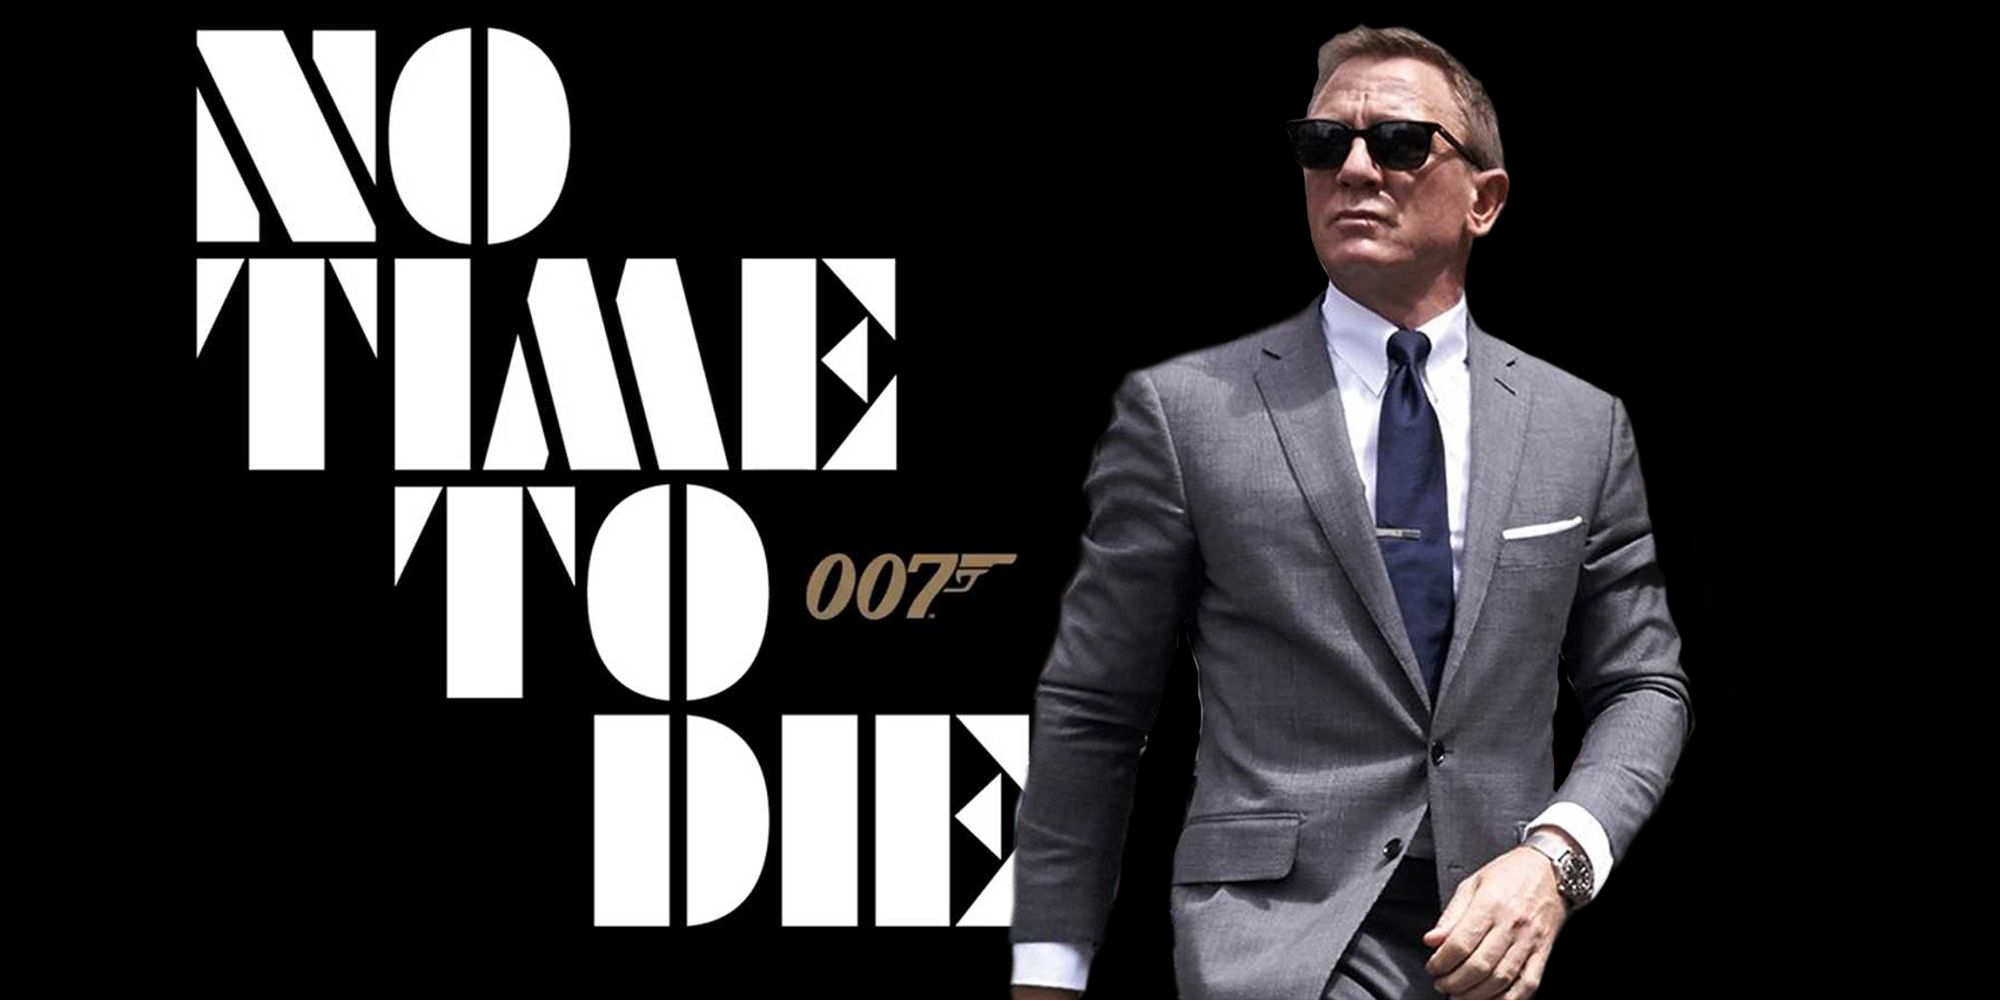 Daniel Craig as James Bond superimposed over the logo for no time to die